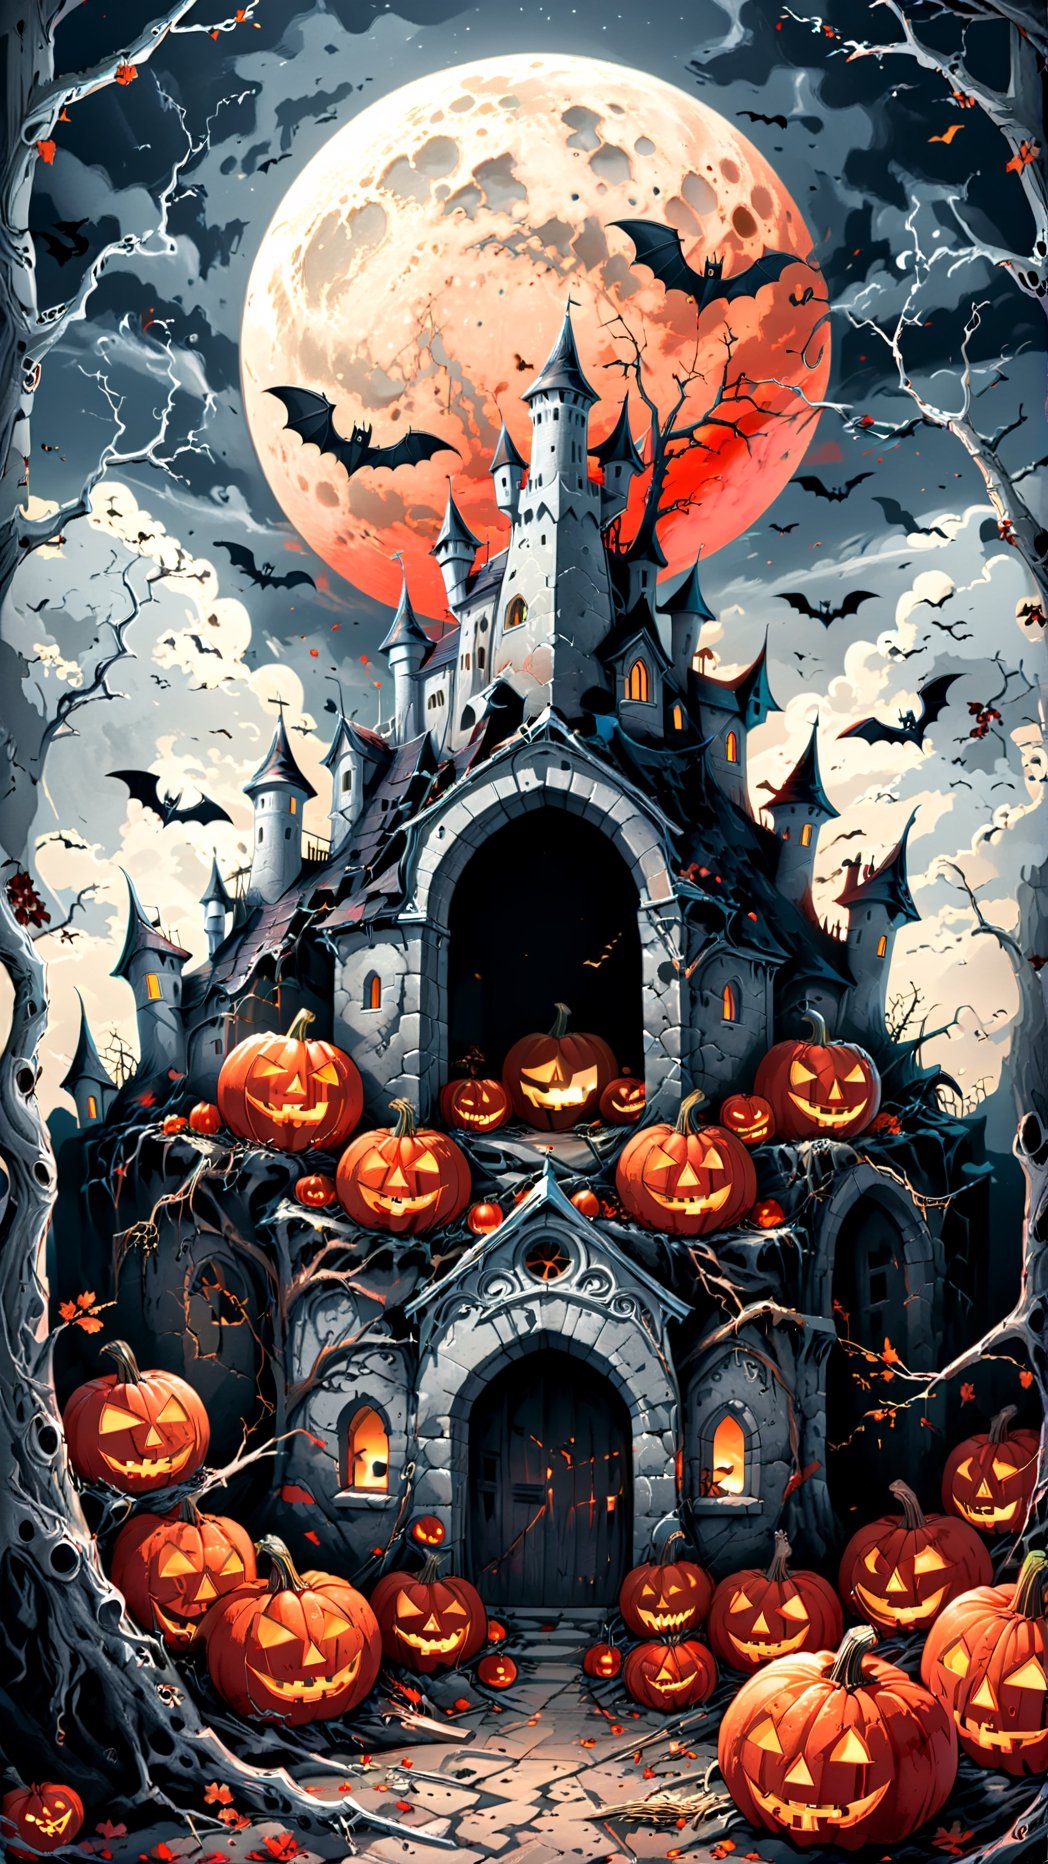 black and white, colouring book illustration style Halloween poster, pumpkins, bats, withered giant branches, red moon, ray tracing, stacked chests, castle black and White,detailmaster2,HellAI